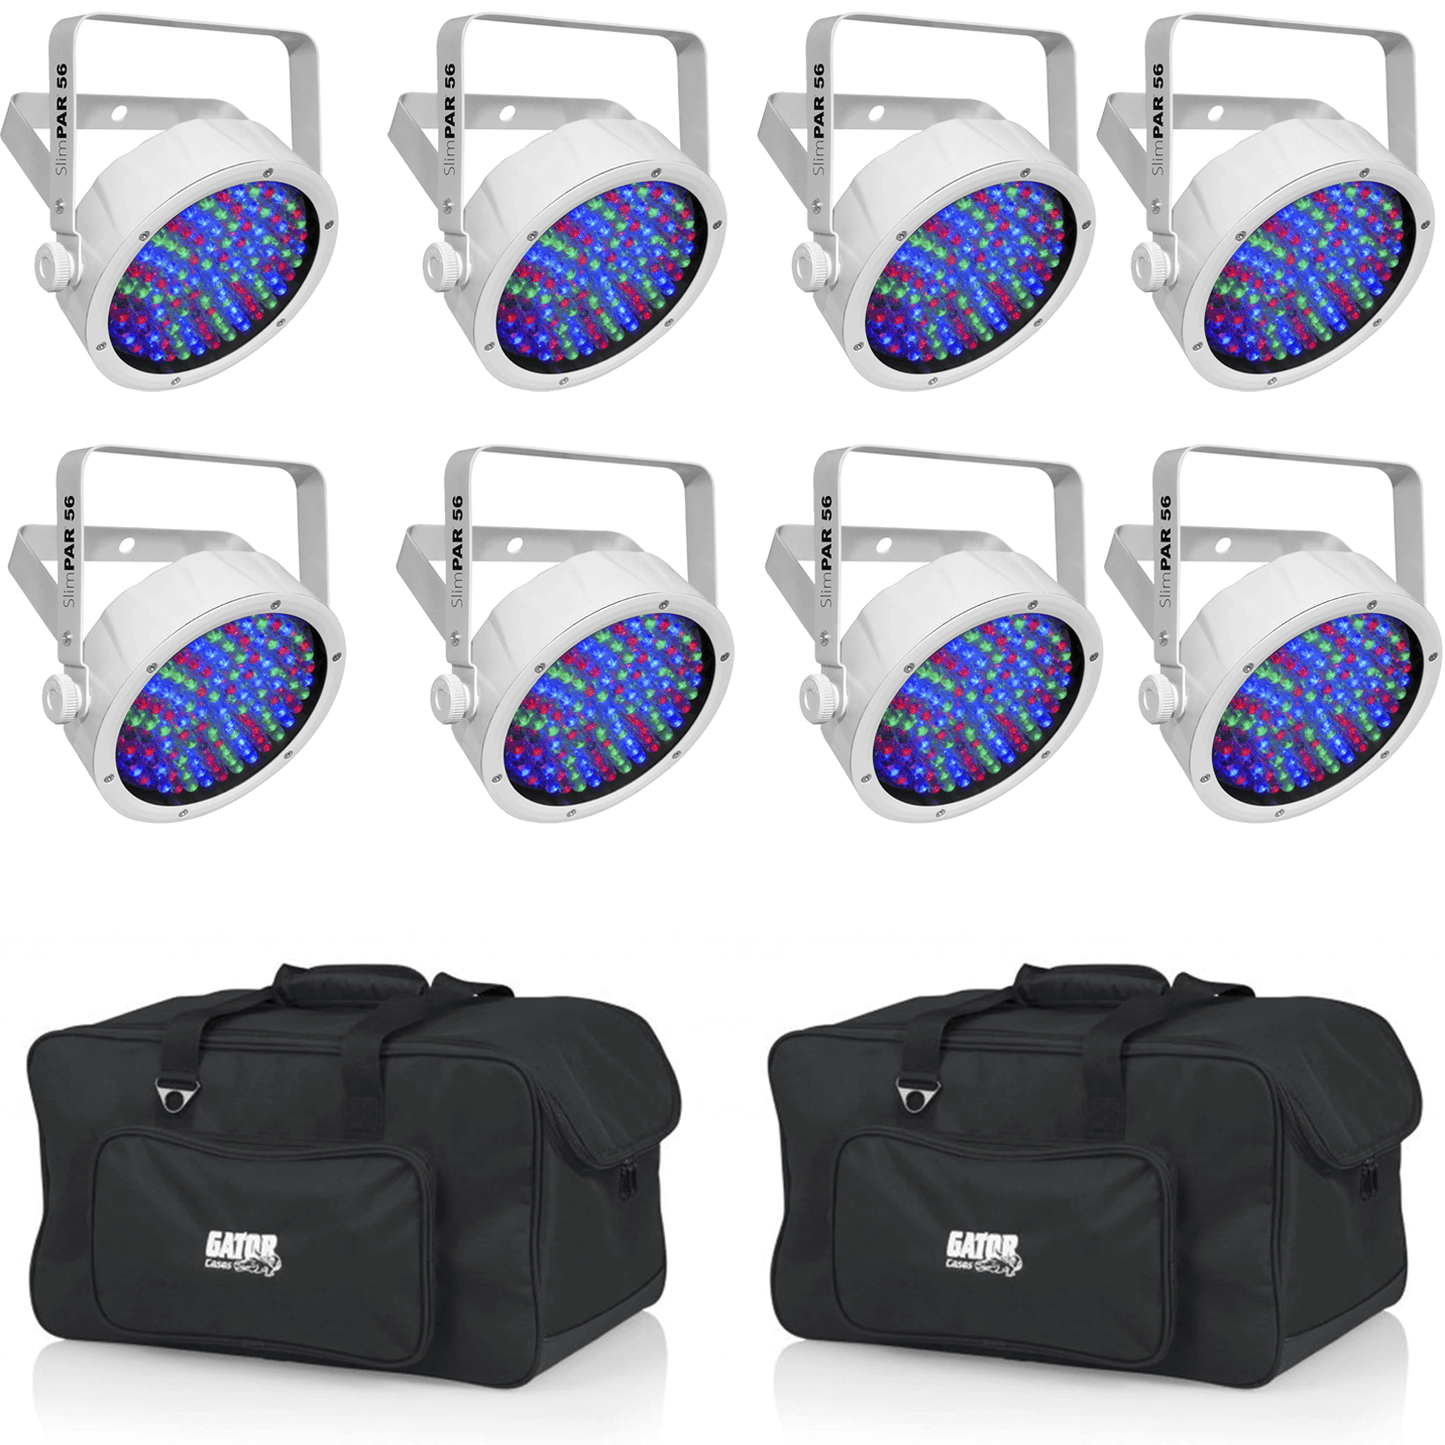 Chauvet SlimPAR 56 WHT RGB LED Light 8-Pack with Gator Bags - PSSL ProSound and Stage Lighting